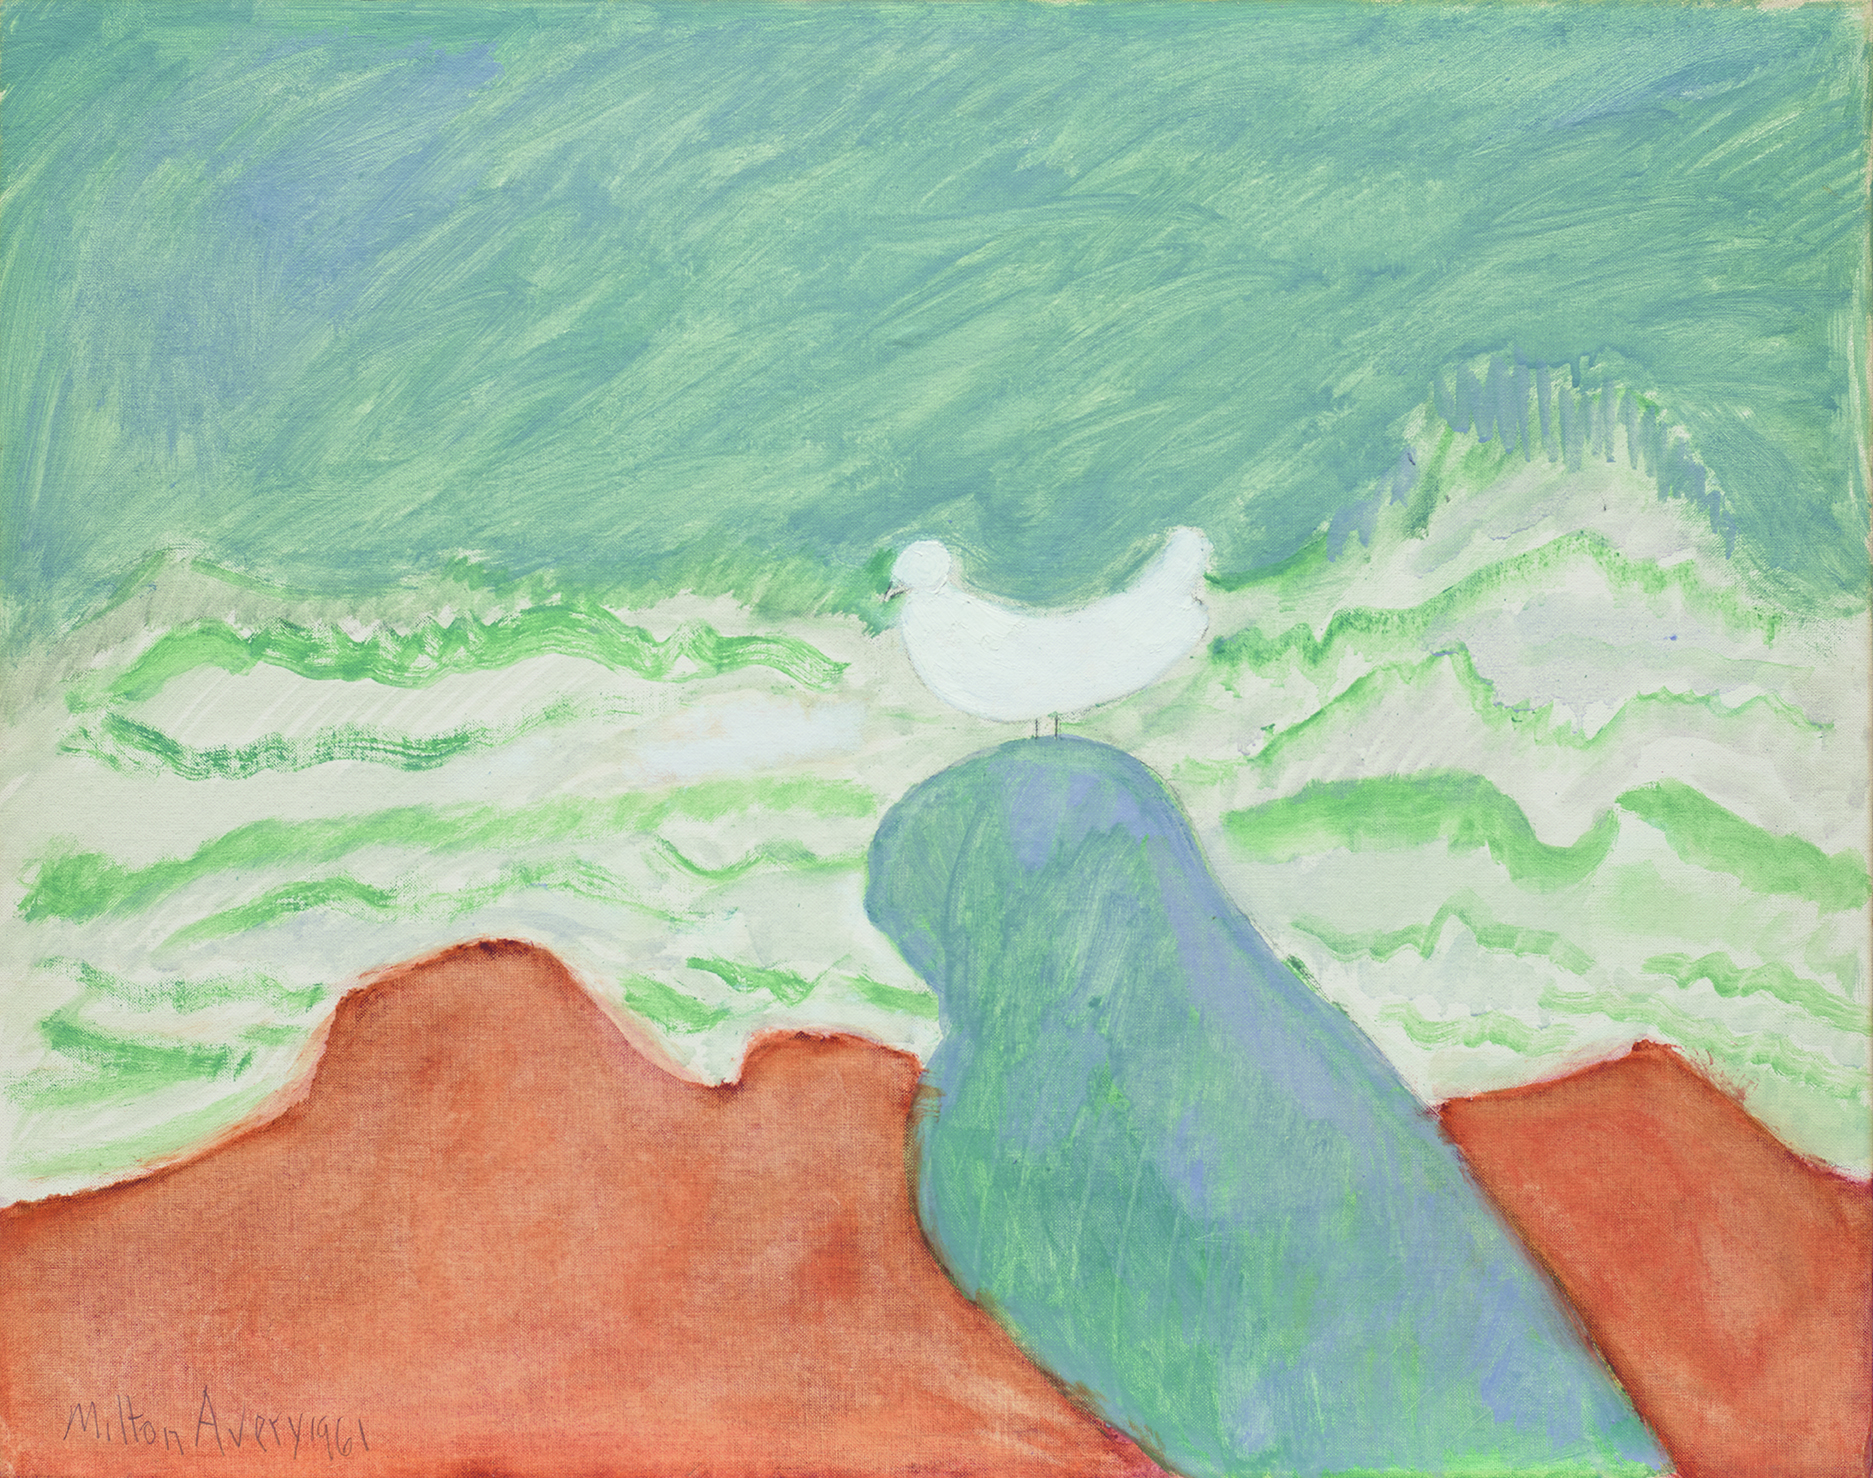 "Bird by Wild Sea" (oil and pencil on canvas board), signed and dated "Milton Avery 1961"